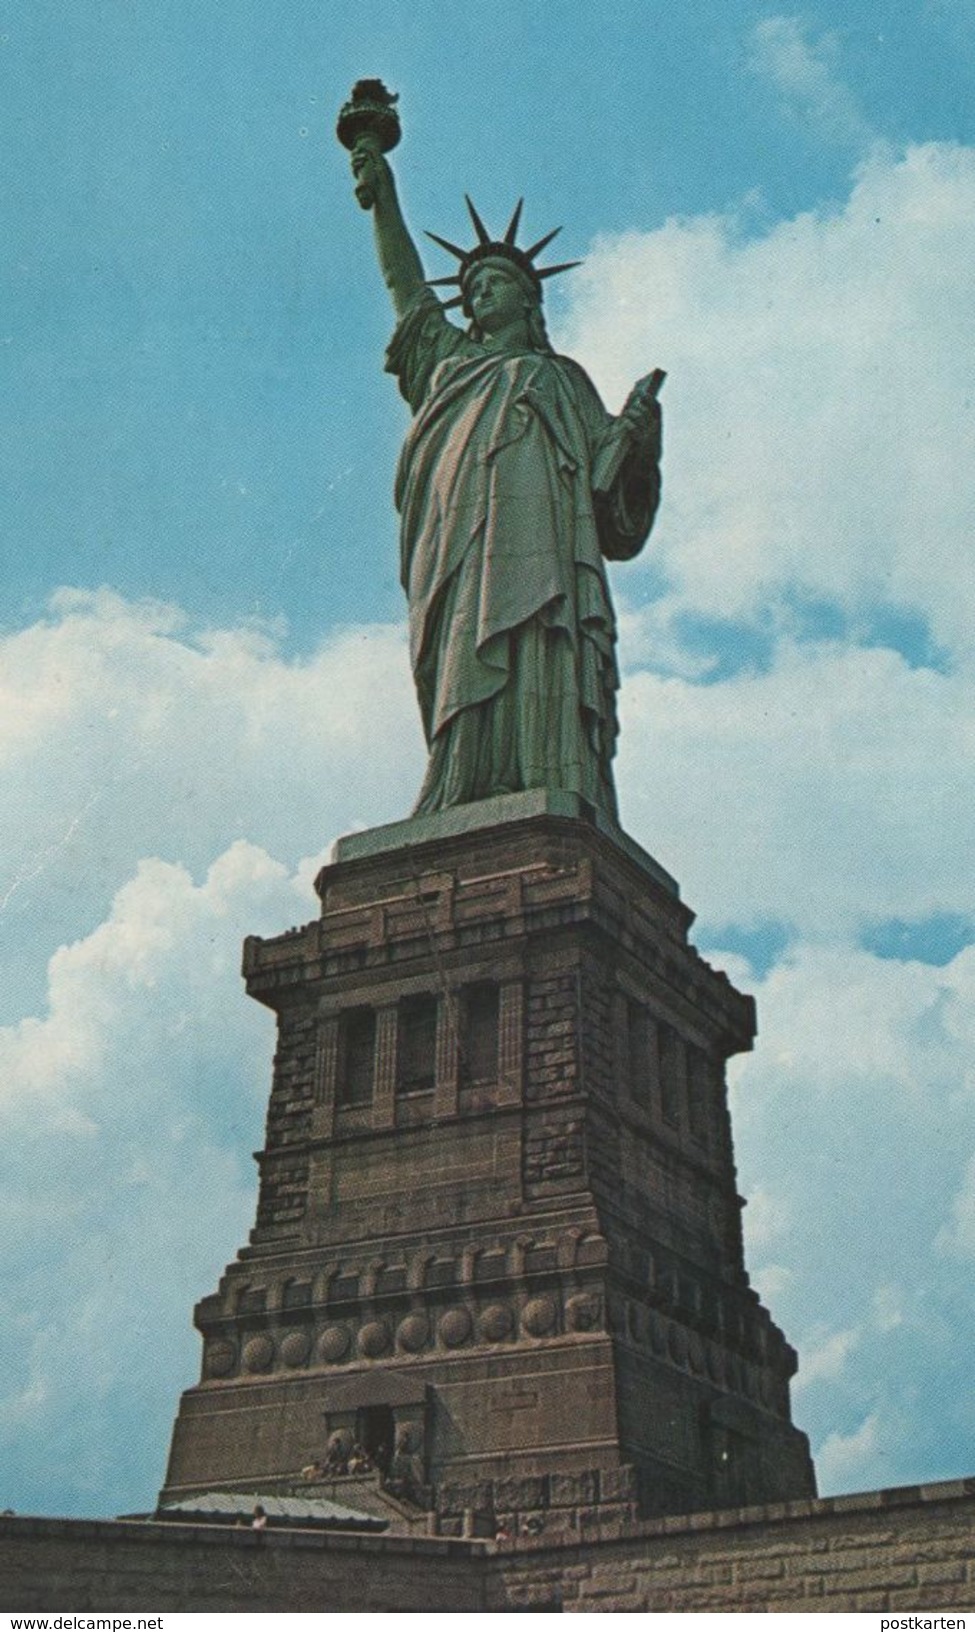 ÄLTERE POSTKARTE THE STATUE OF LIBERTY NEW YORK CITY UNVEILED IN OCTOBER 1886 Ansichtskarte Postcard Cpa AK - Freiheitsstatue